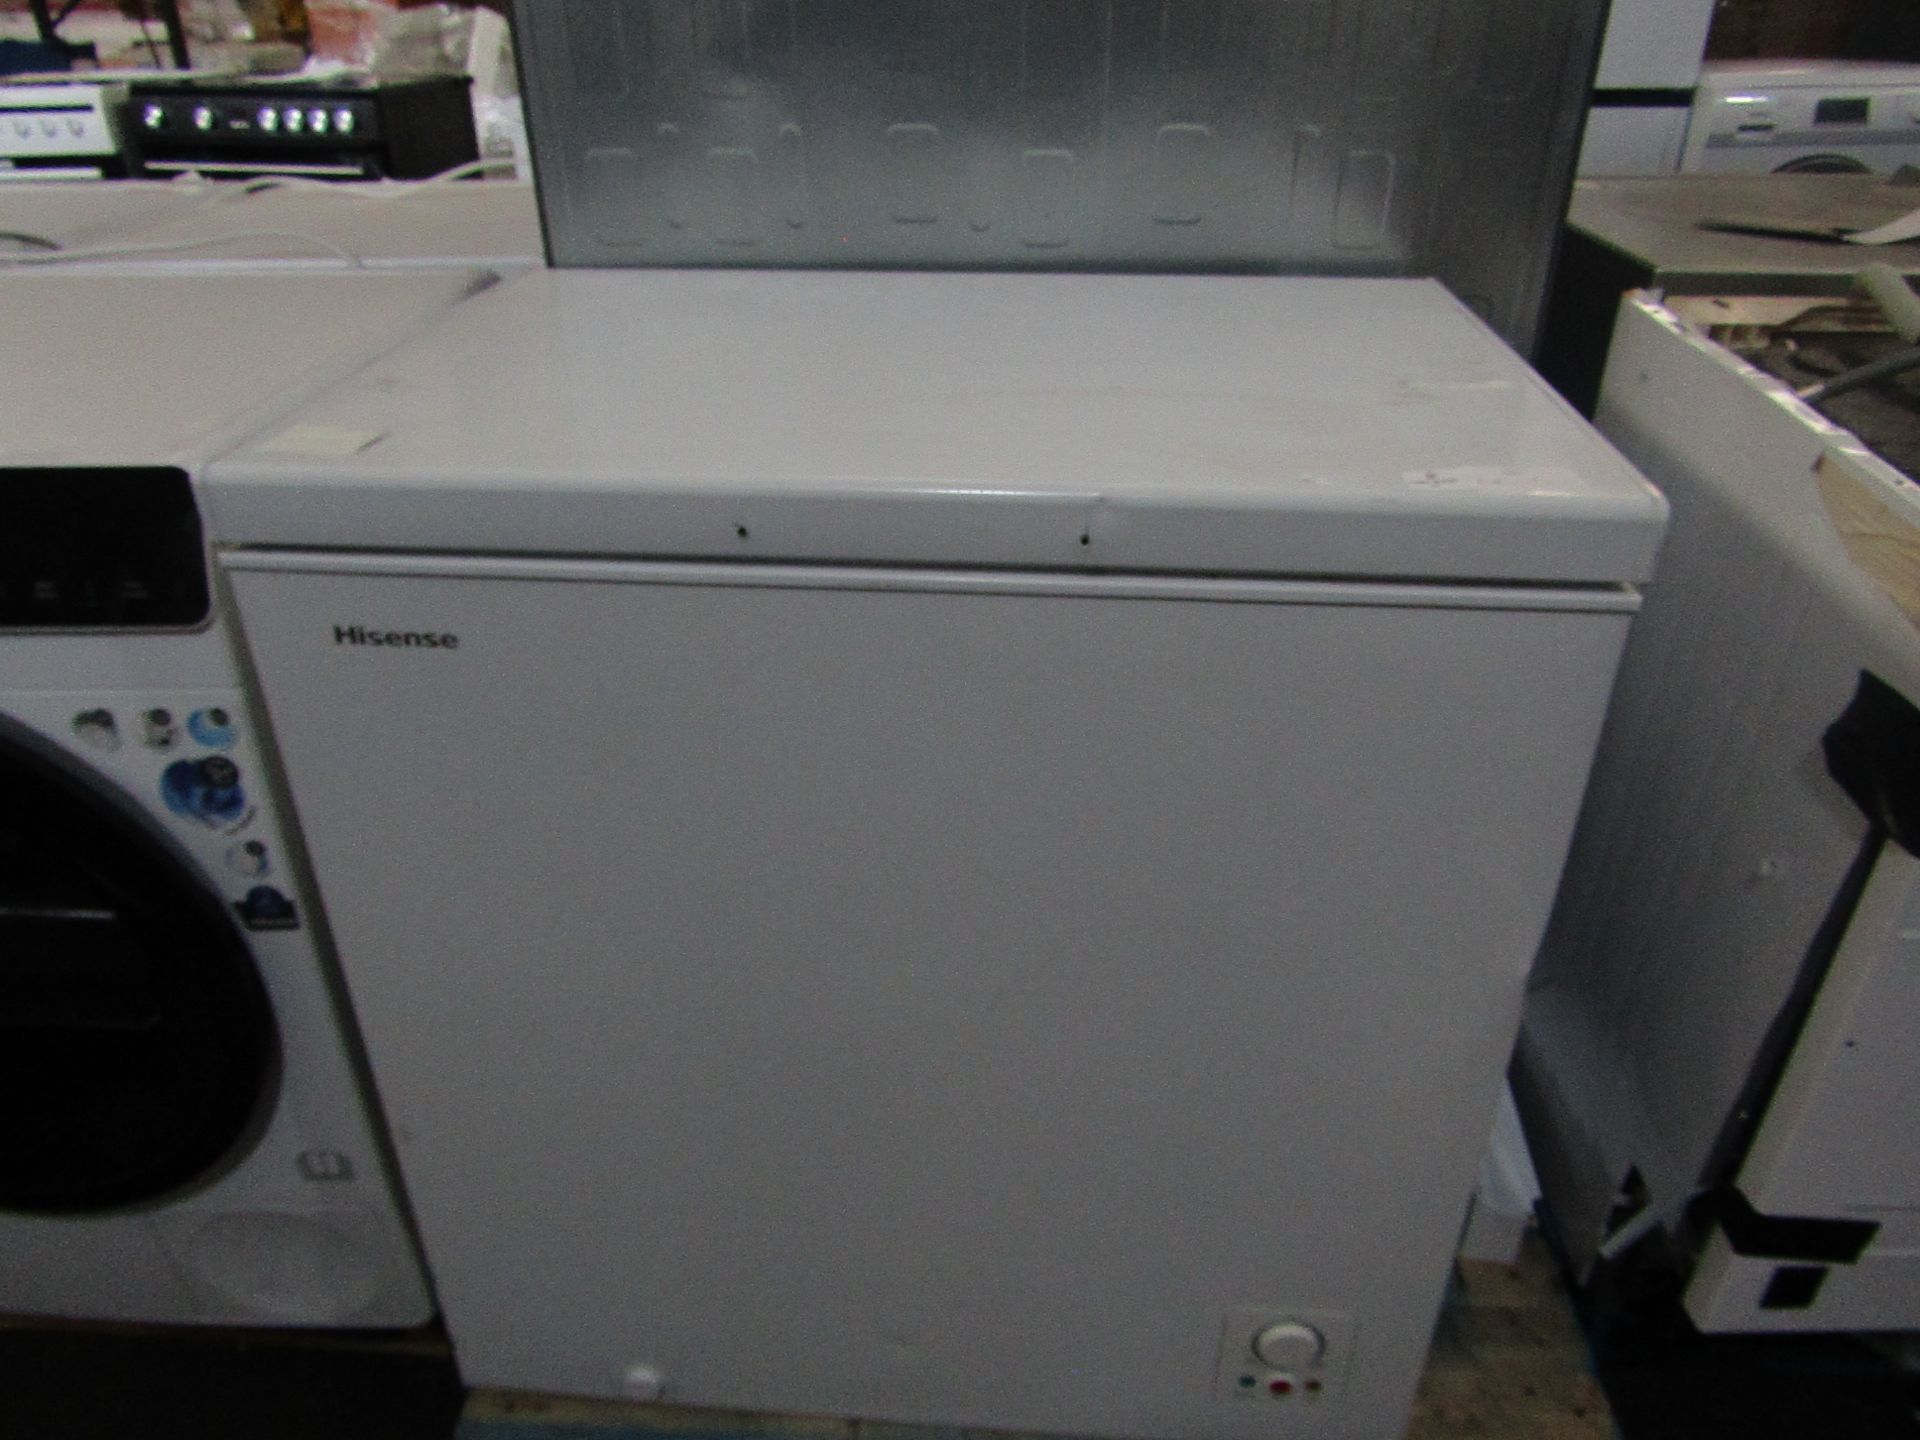 Hisense Chest freezer, powers on and gets cold, has a couple of small marks on it but other wise